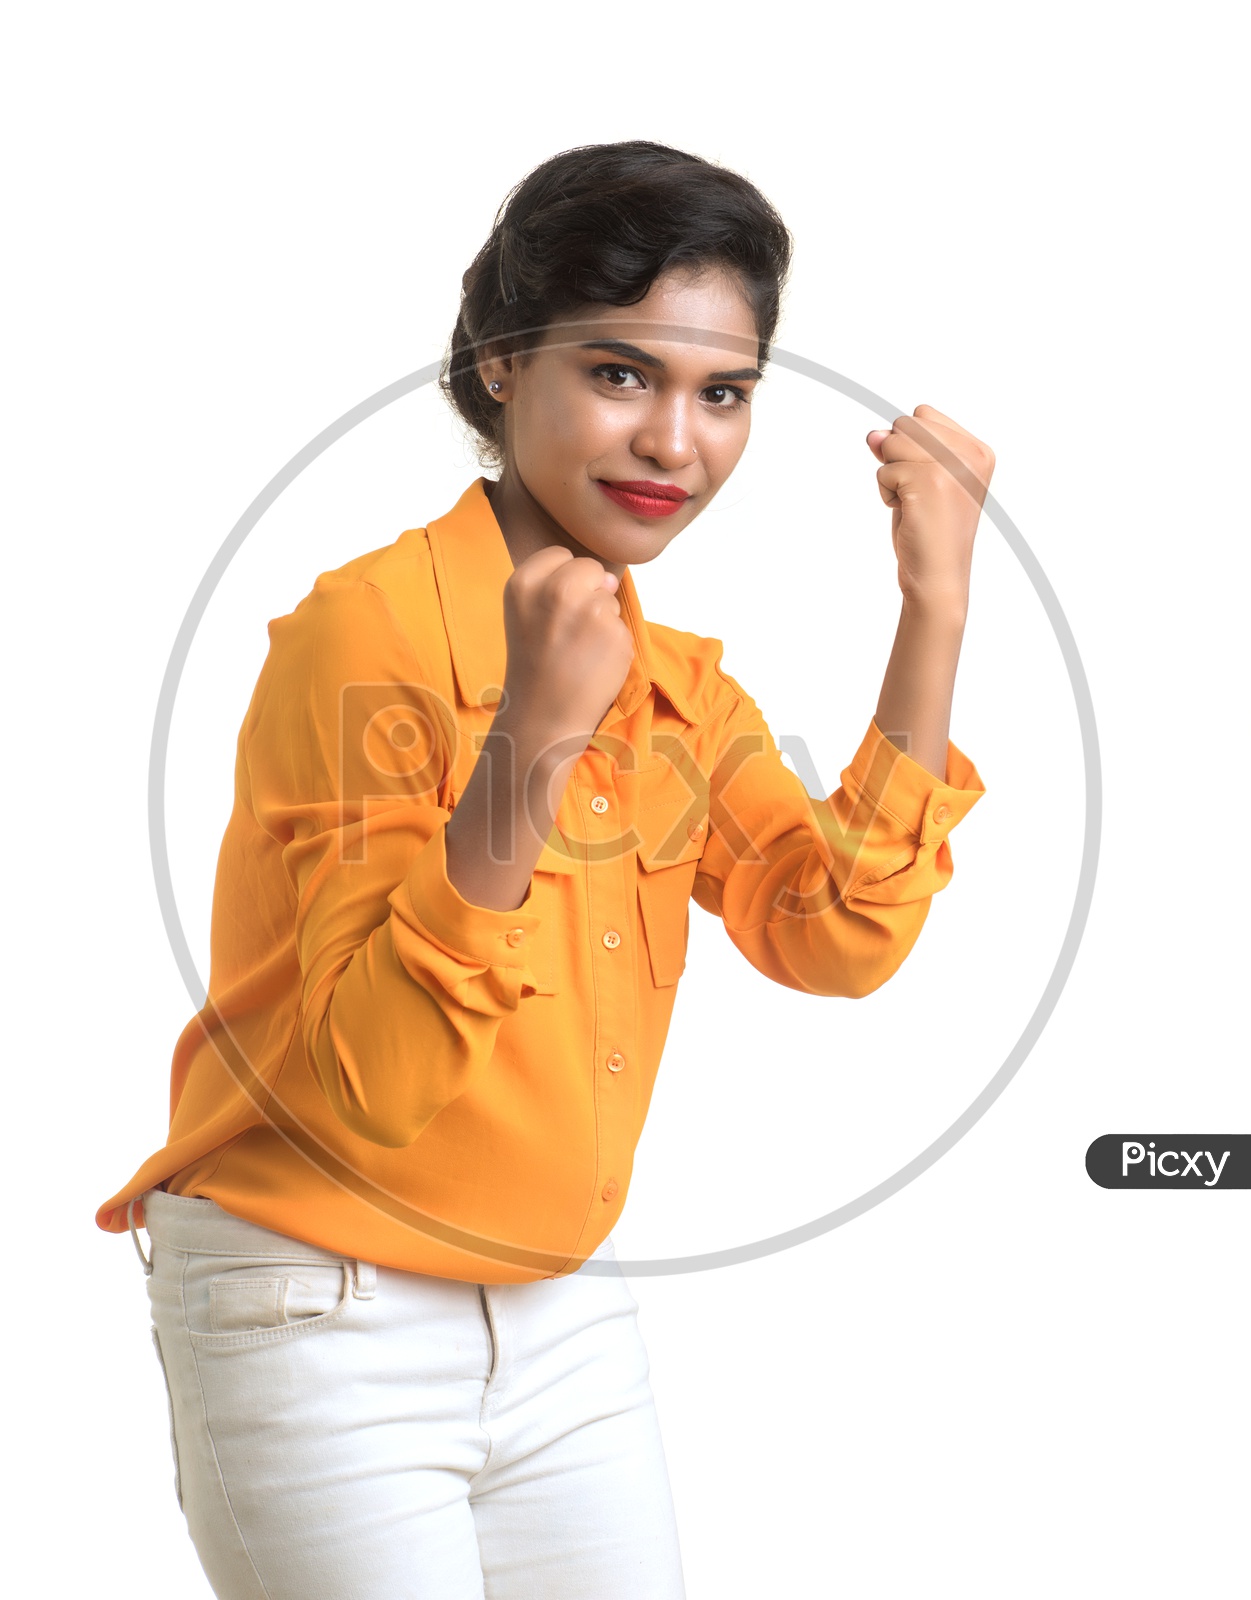 Pretty Young Girl With a Gesture And Expression Posing On an Isolated White Background